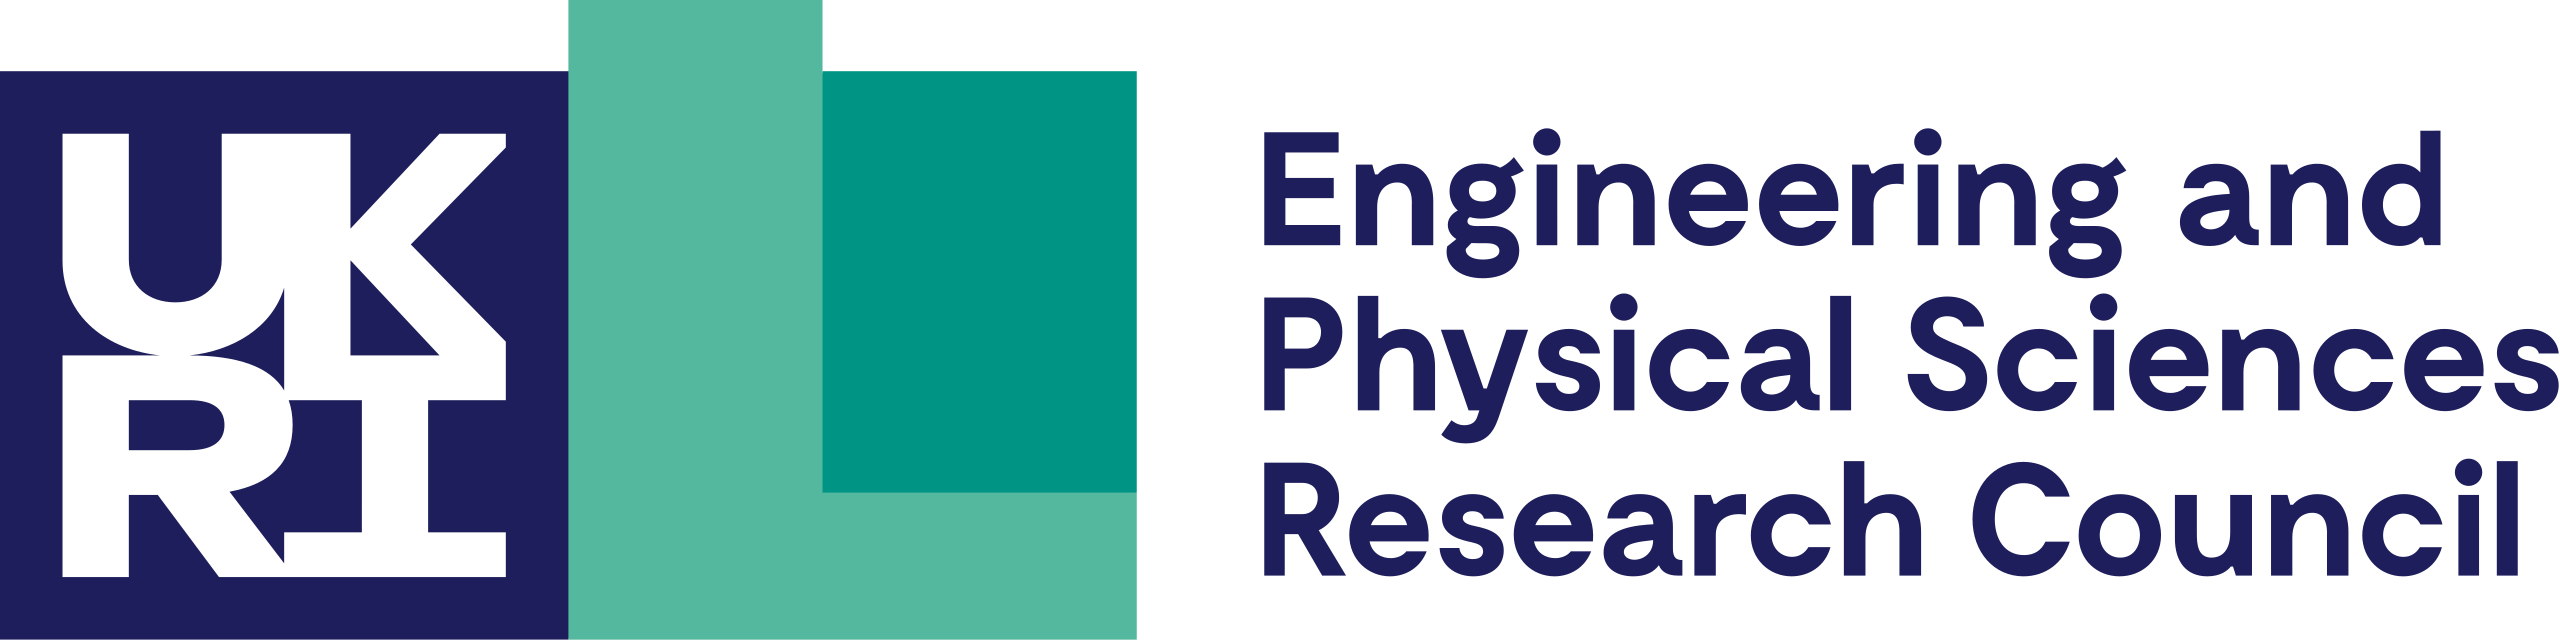 Engineering and Physical Sciences Research Council (Swindon, GB)'s Image